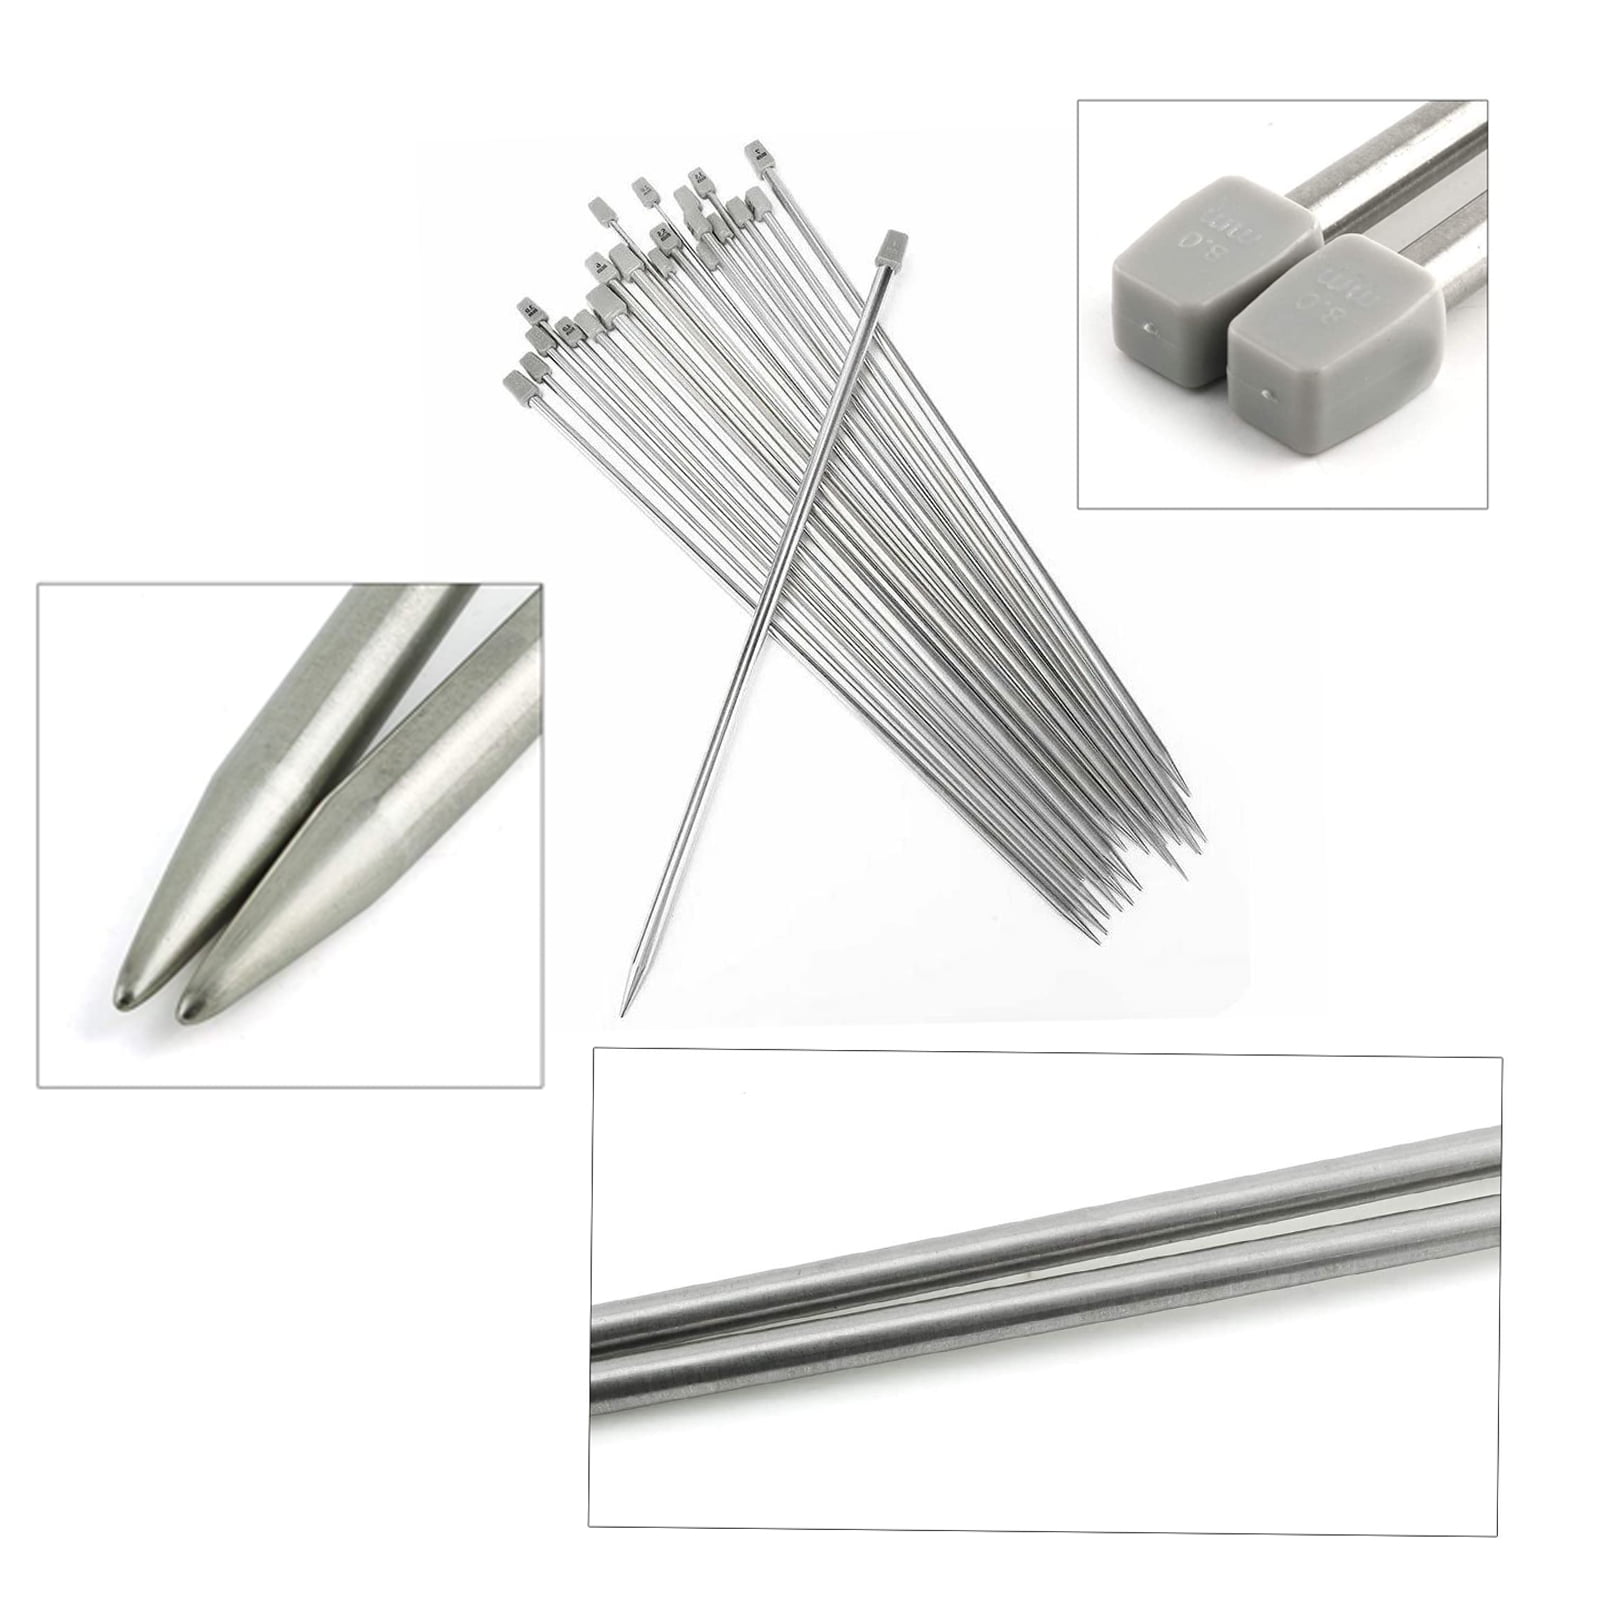 Straight Single Pointed Stainless Steel Sweater Needles with Locking Stitch Makers Large-Eye Blunt Needle 14 Pairs Knitting Needle Set 2mm- 10mm